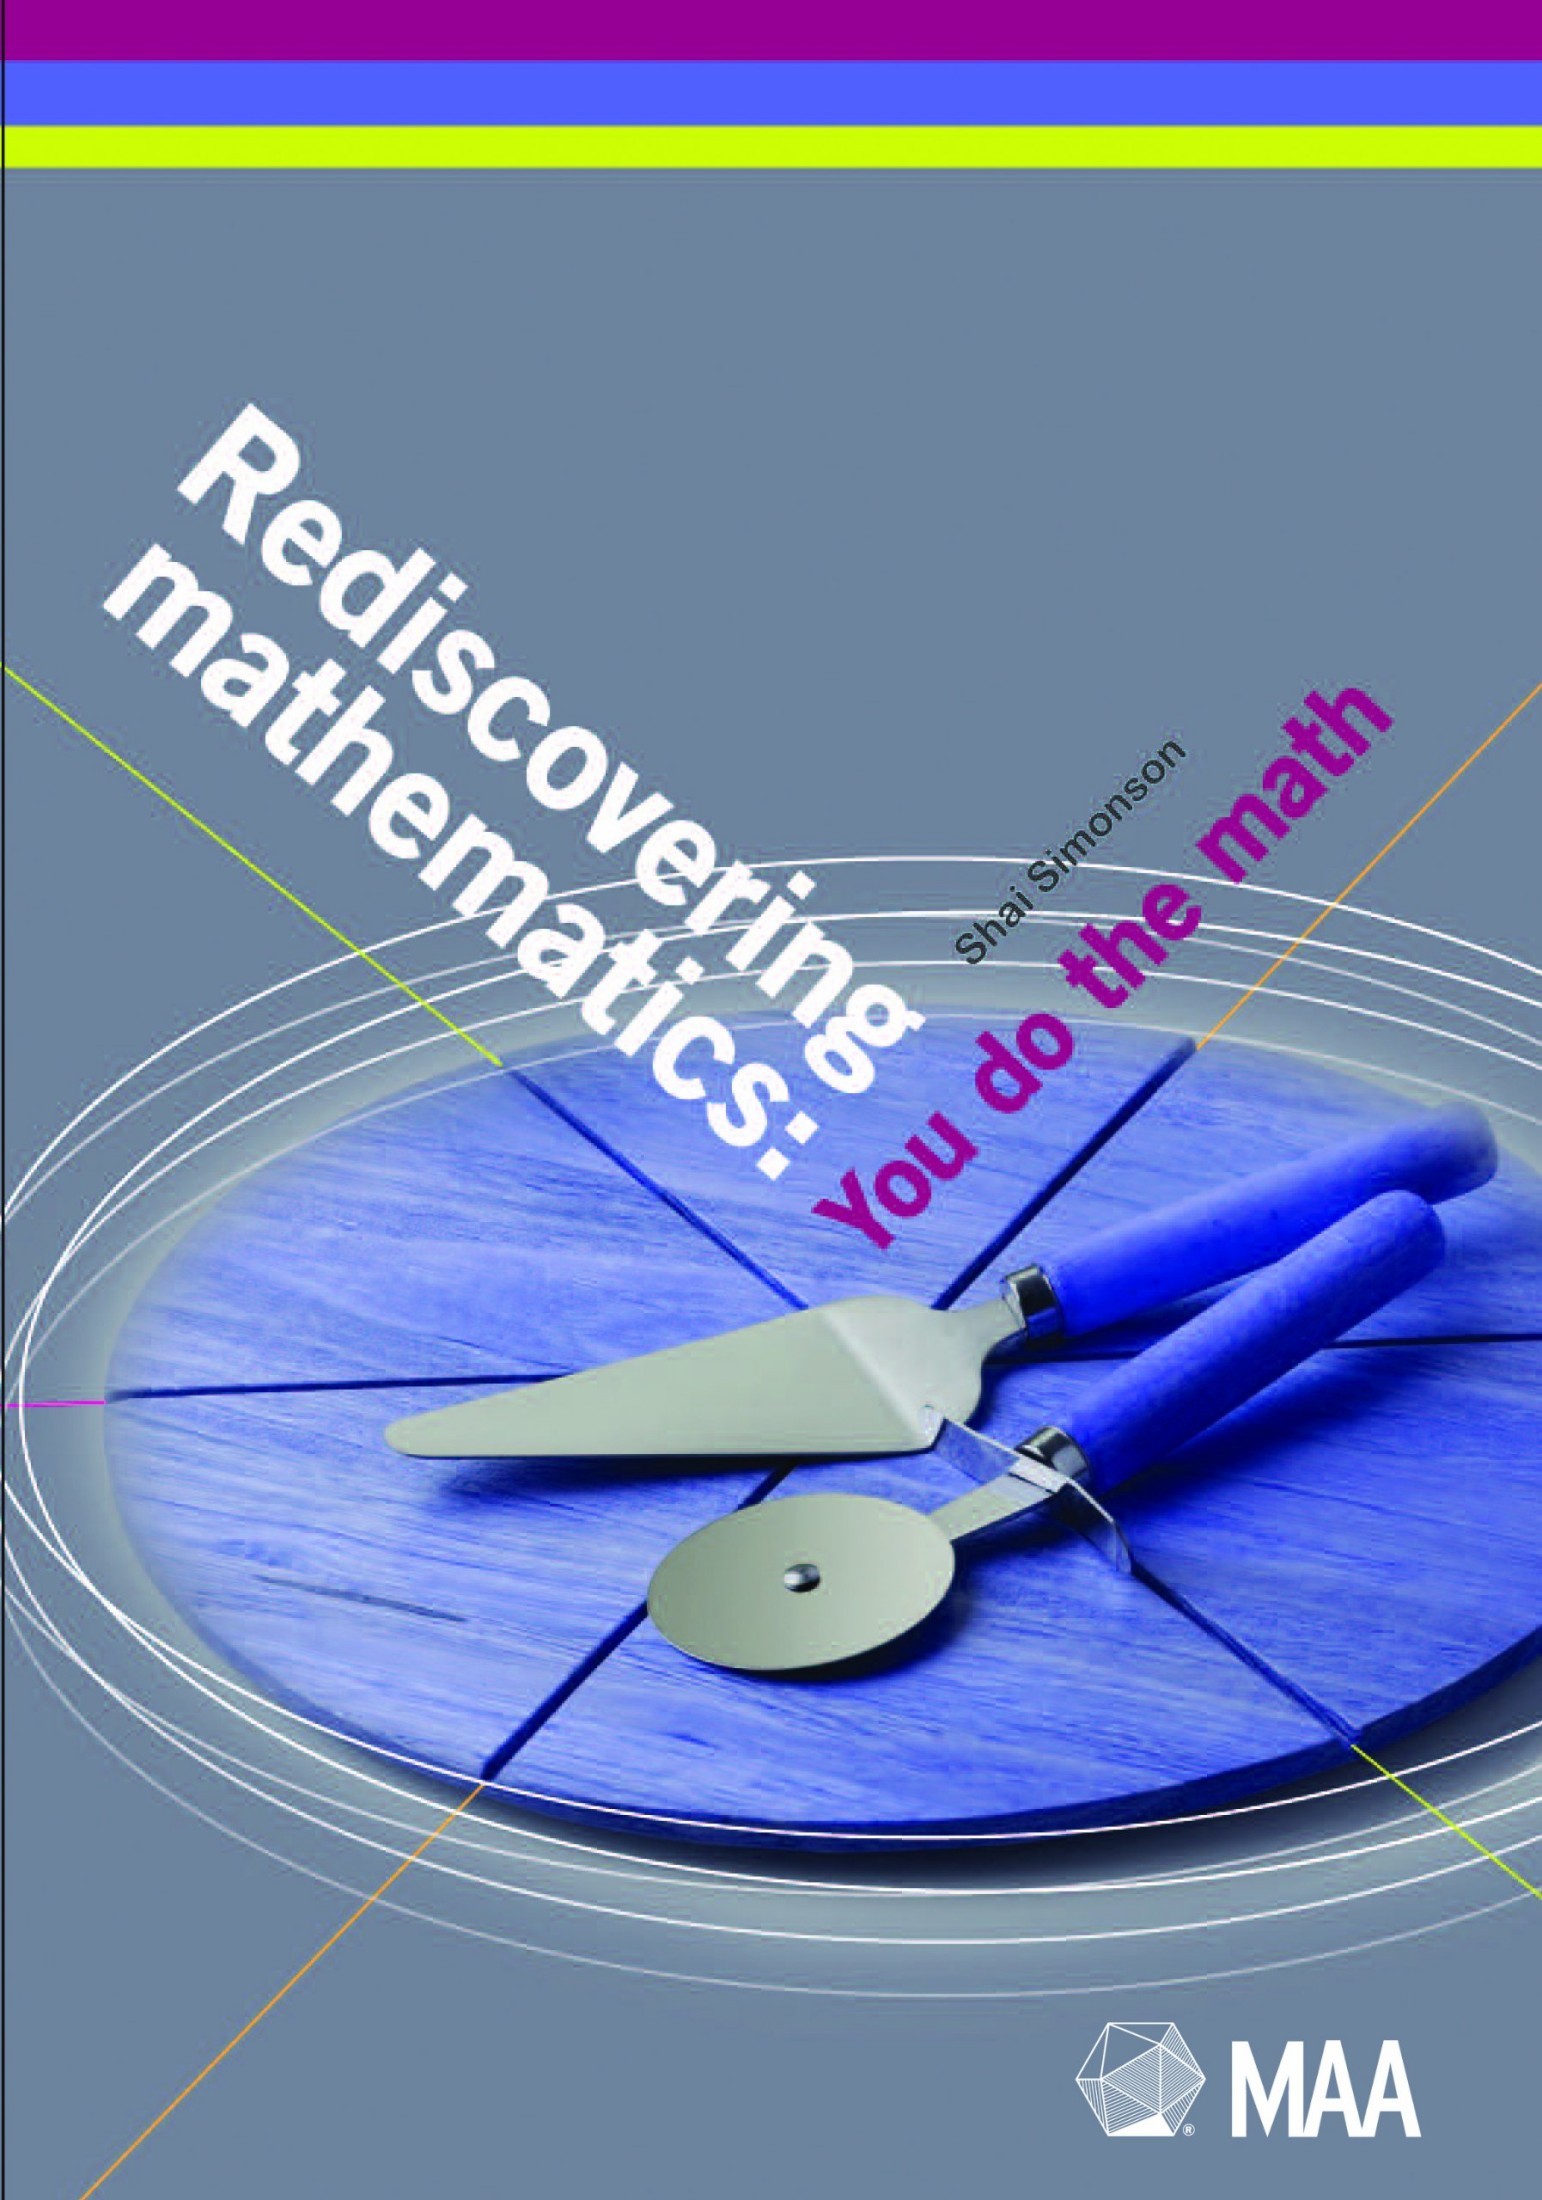 Rediscovering Mathematics: You Do the Math